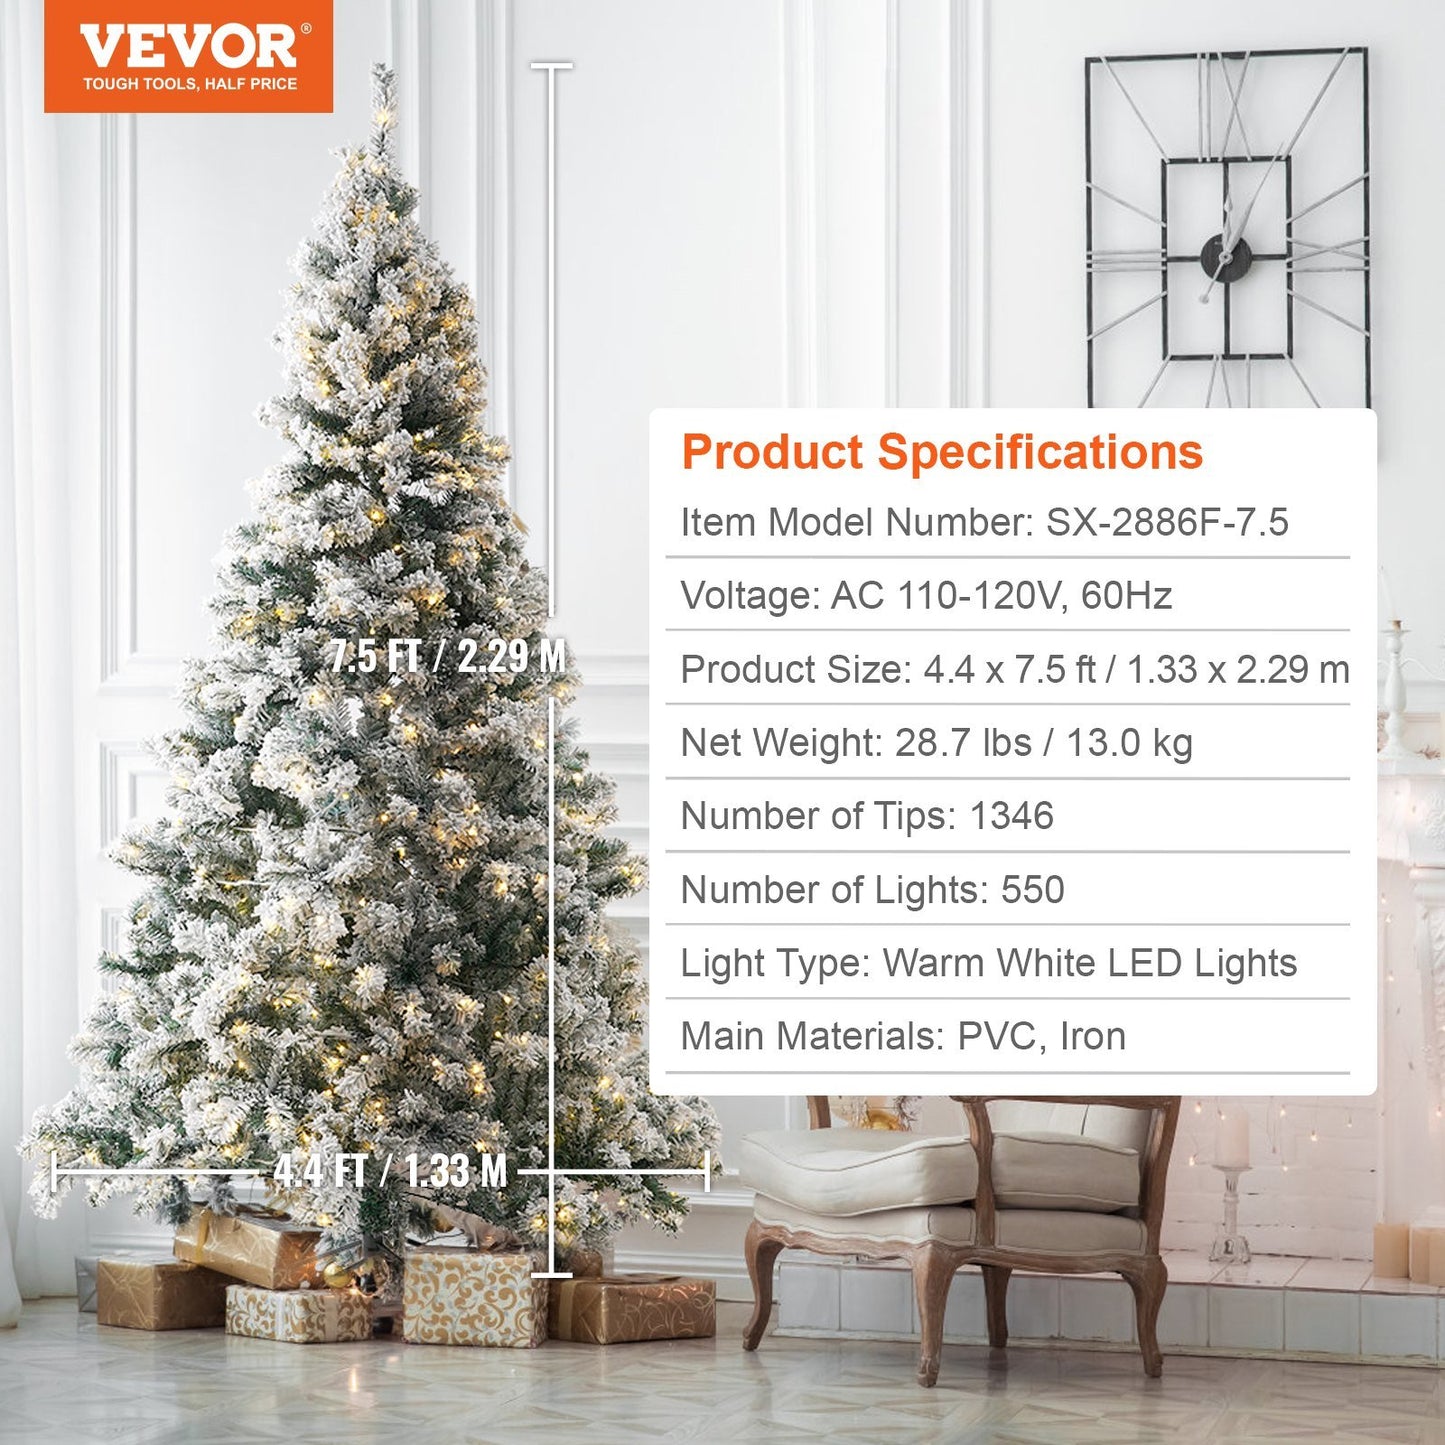 VEVOR Christmas Tree, Full Holiday Xmas Tree with LED Lights, Metal Base for Home Party Office Decoration